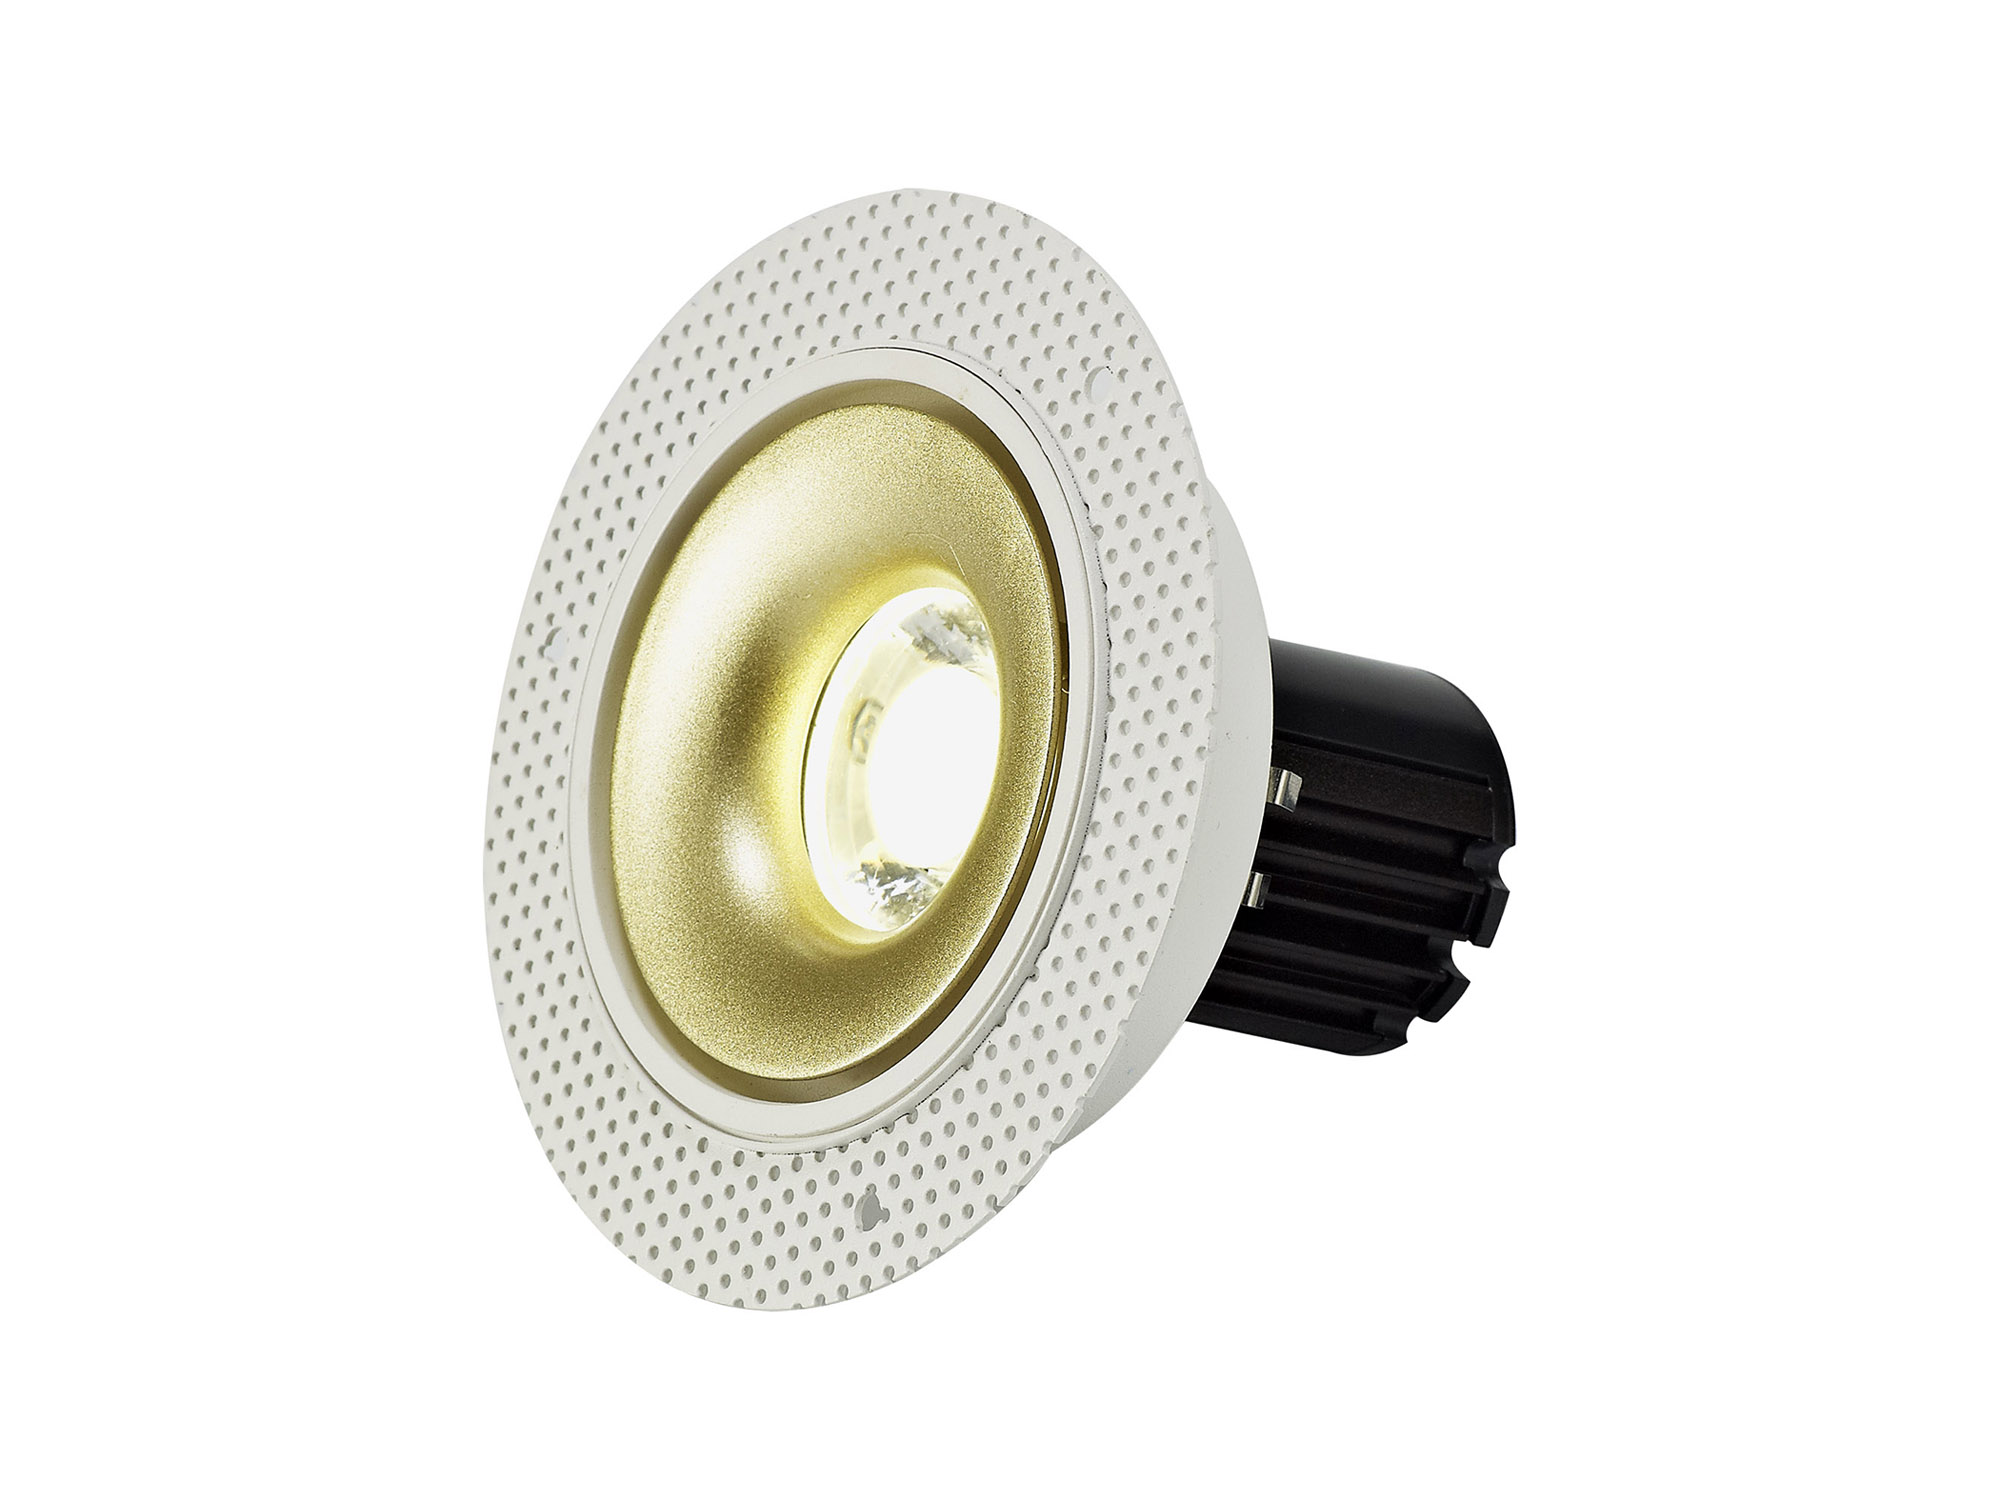 DM201105  Bolor T 10 Tridonic Powered 10W 4000K 810lm 36° CRI>90 LED Engine White/Gold Trimless Fixed Recessed Spotlight; IP20